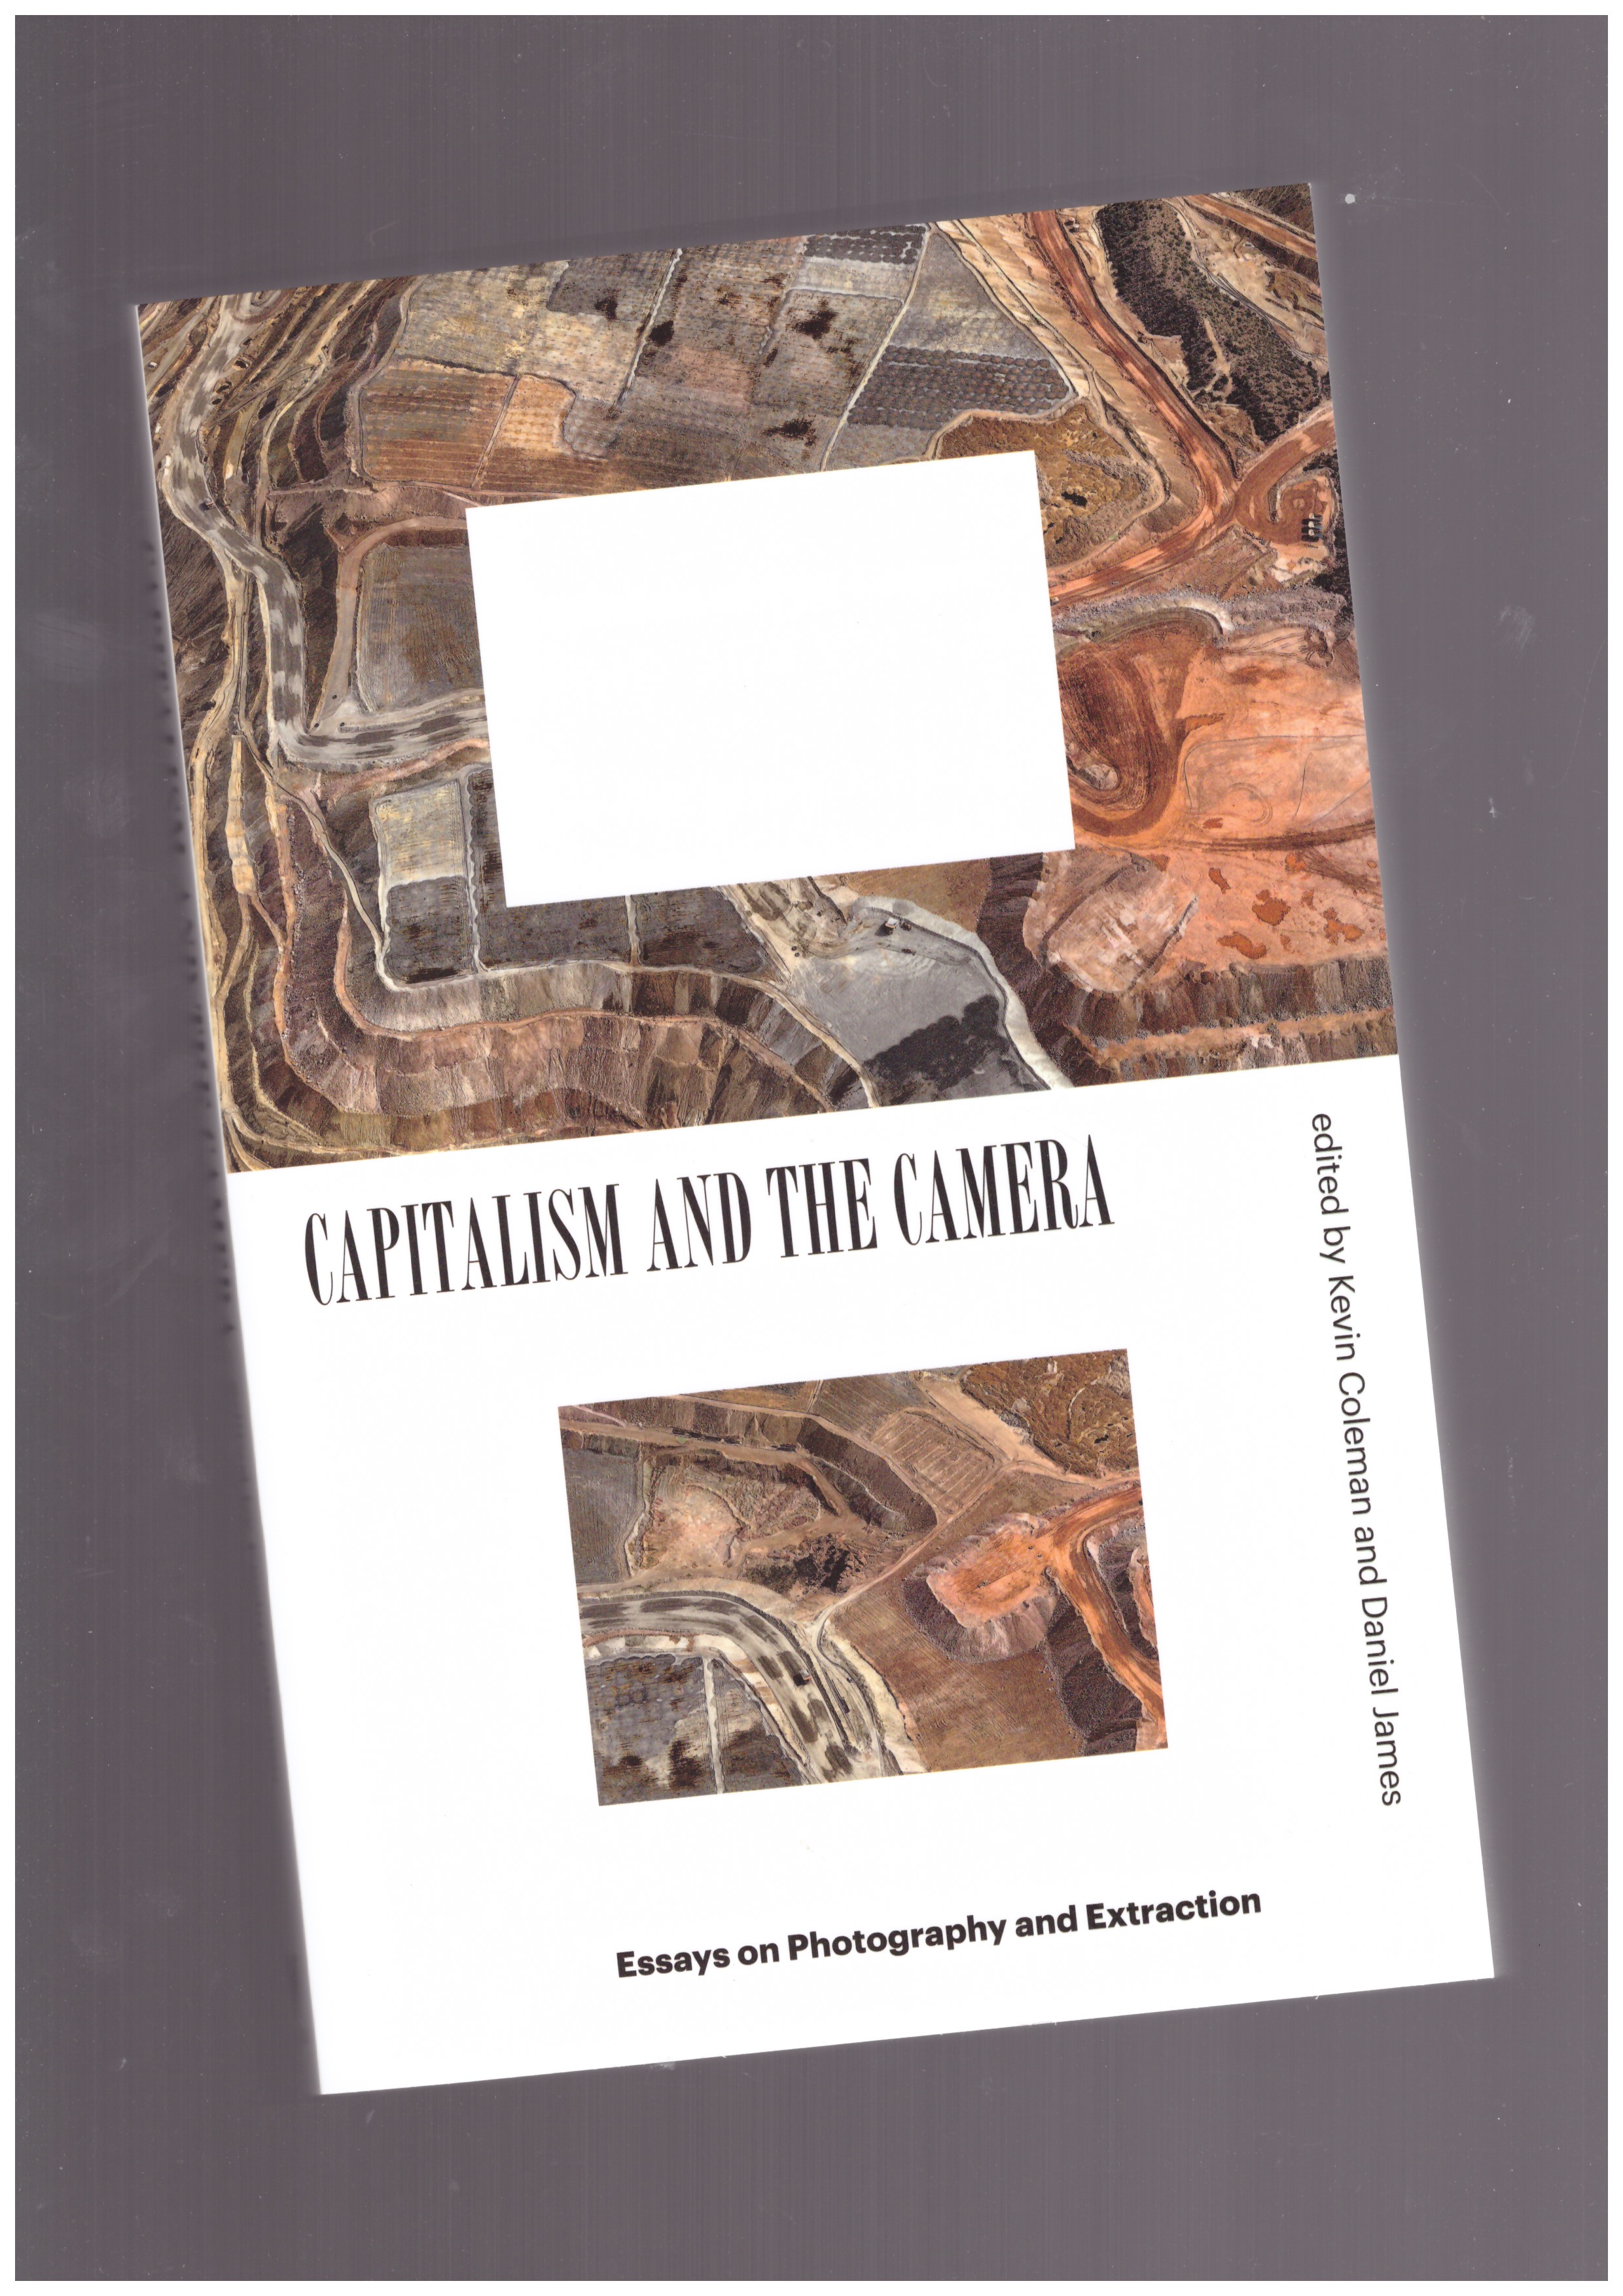 COLEMAN, Kevin; JAMES, Daniel (eds.) - Capitalism and the Camera